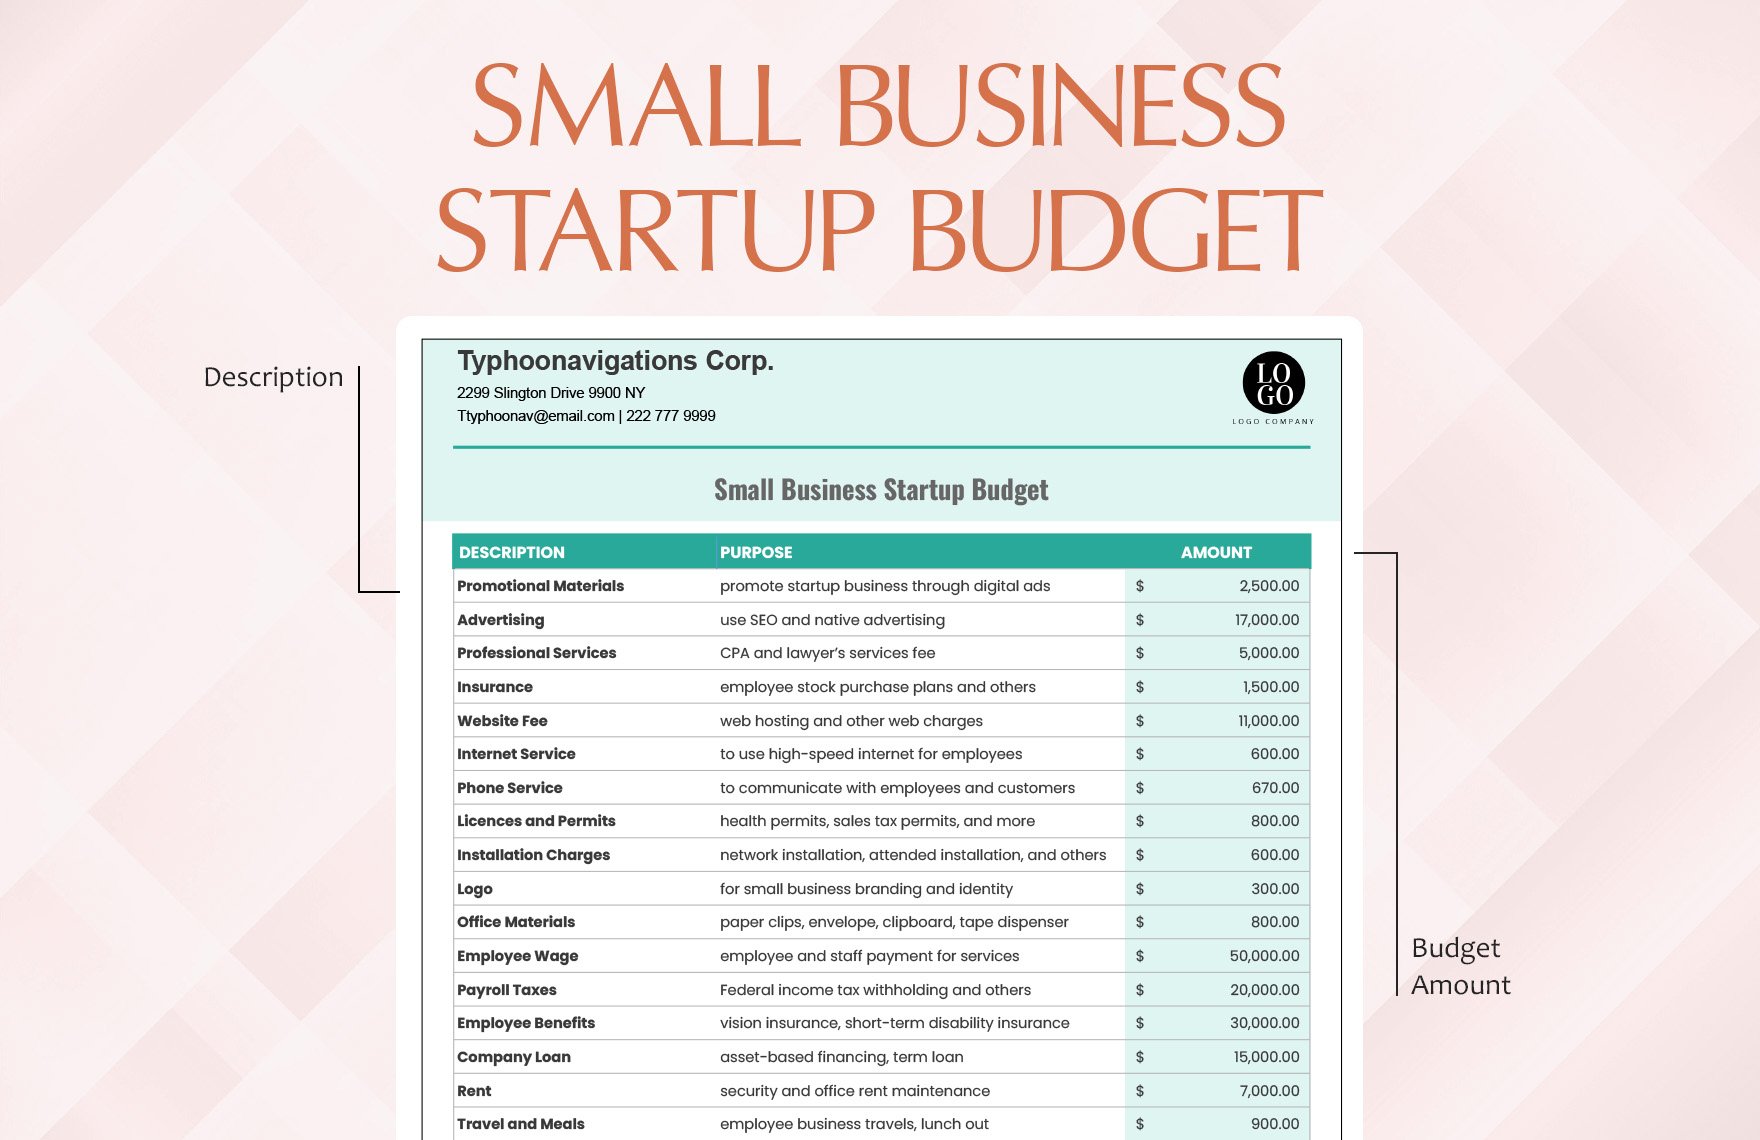 Small Business Startup Budget Template